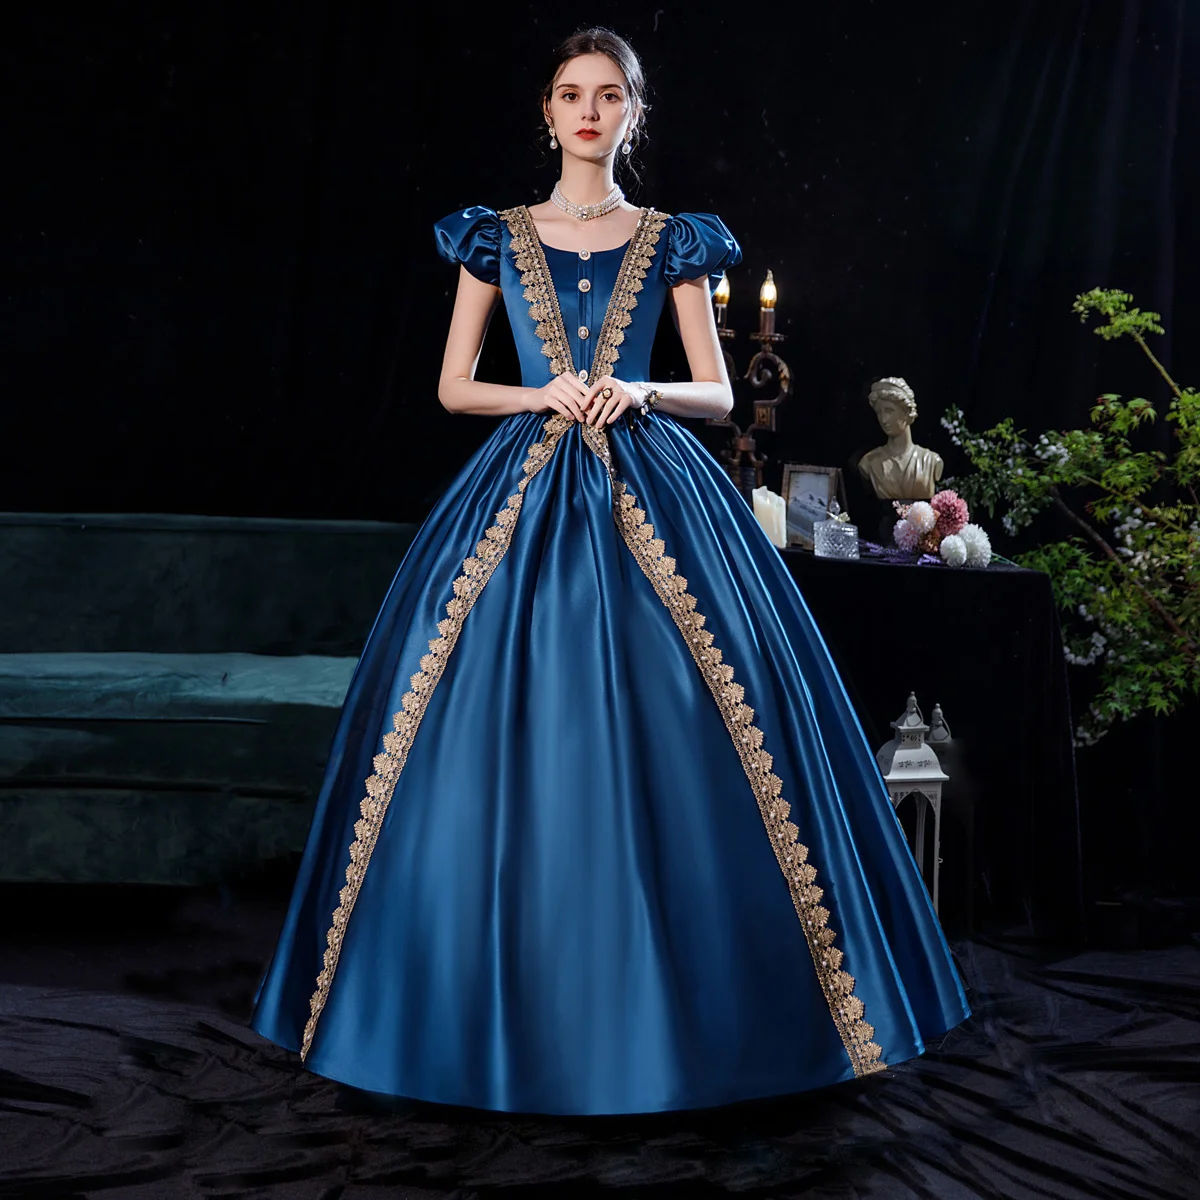 

Evening Gown European Court Clothing Party Masquerade Dinner Full Dress Stage Chorus Show Serve Victorian Ball Gown